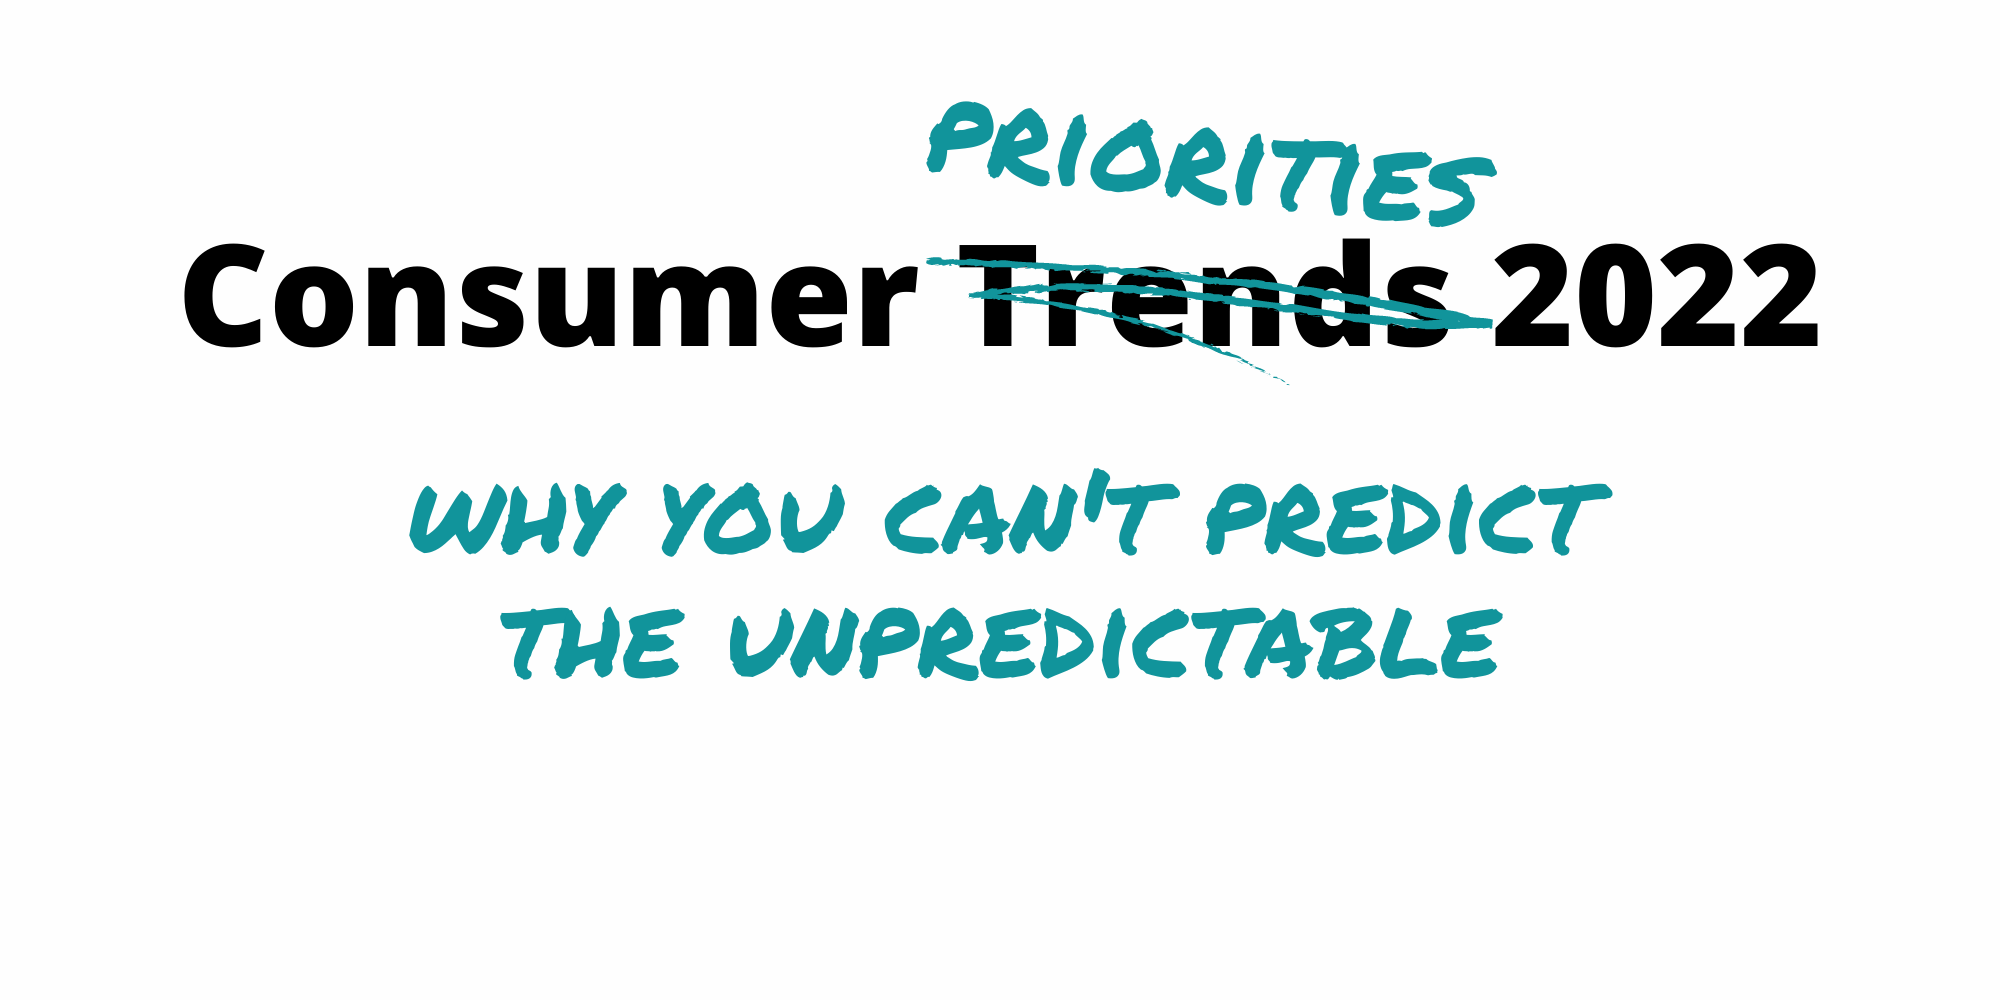 Retailers: Why it's time to stop thinking about consumer trends